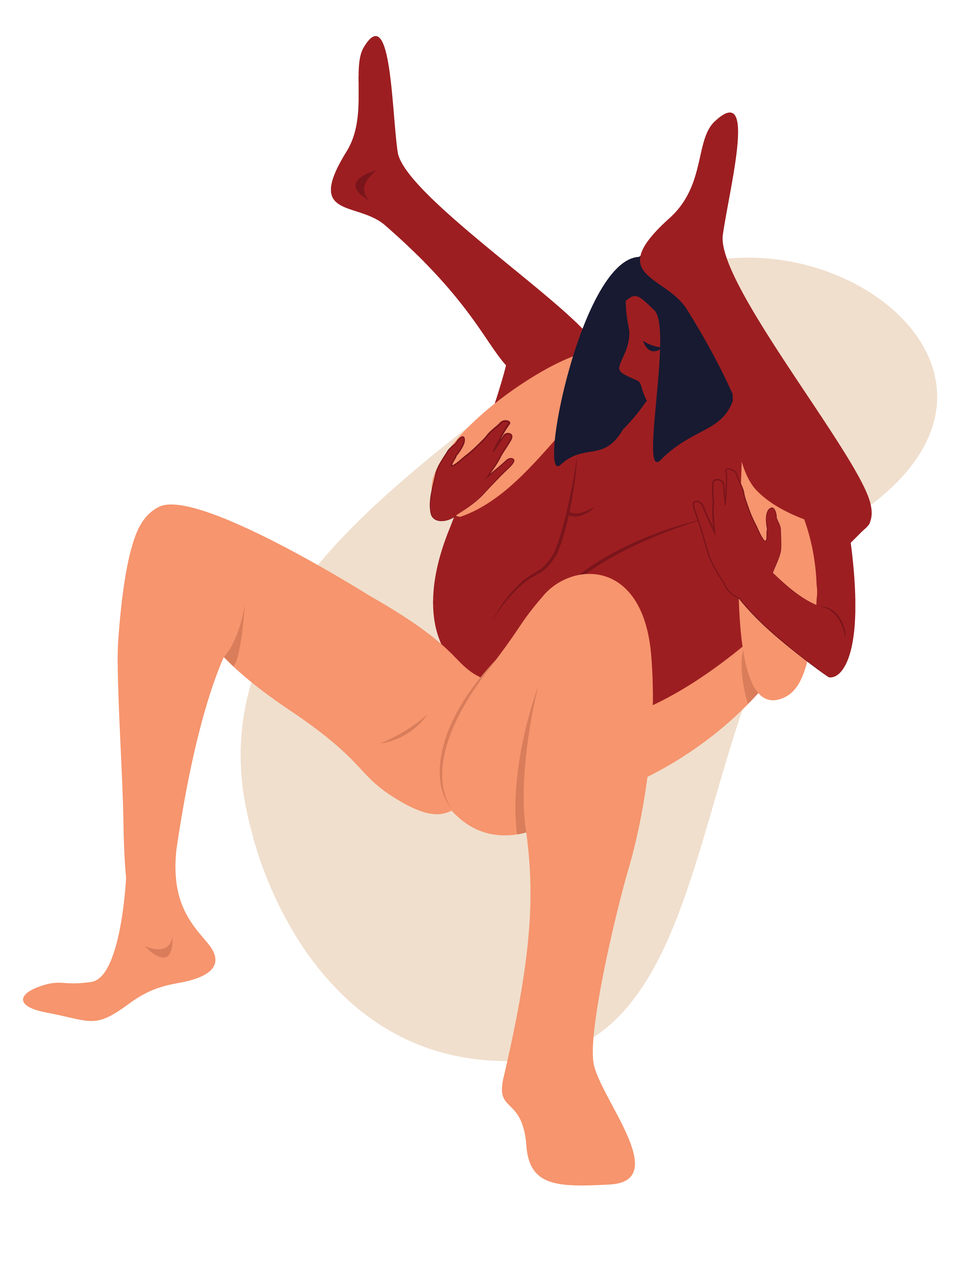 Acrobatic Sex Pose - What Is the Full Nelson Sex Position? See Our Illustrated Guide.